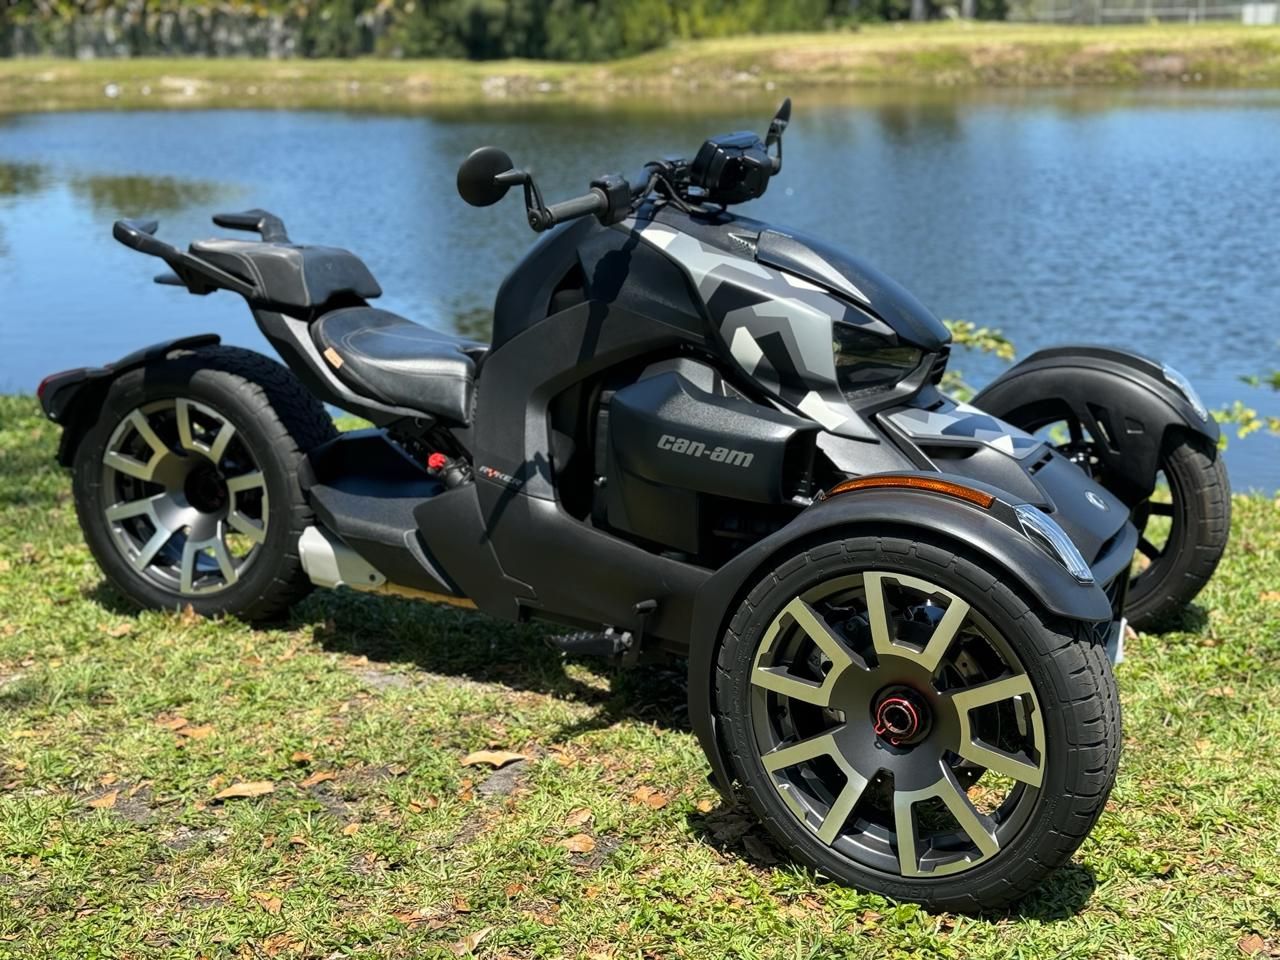 2019 Can-Am Ryker Rally Edition in North Miami Beach, Florida - Photo 1